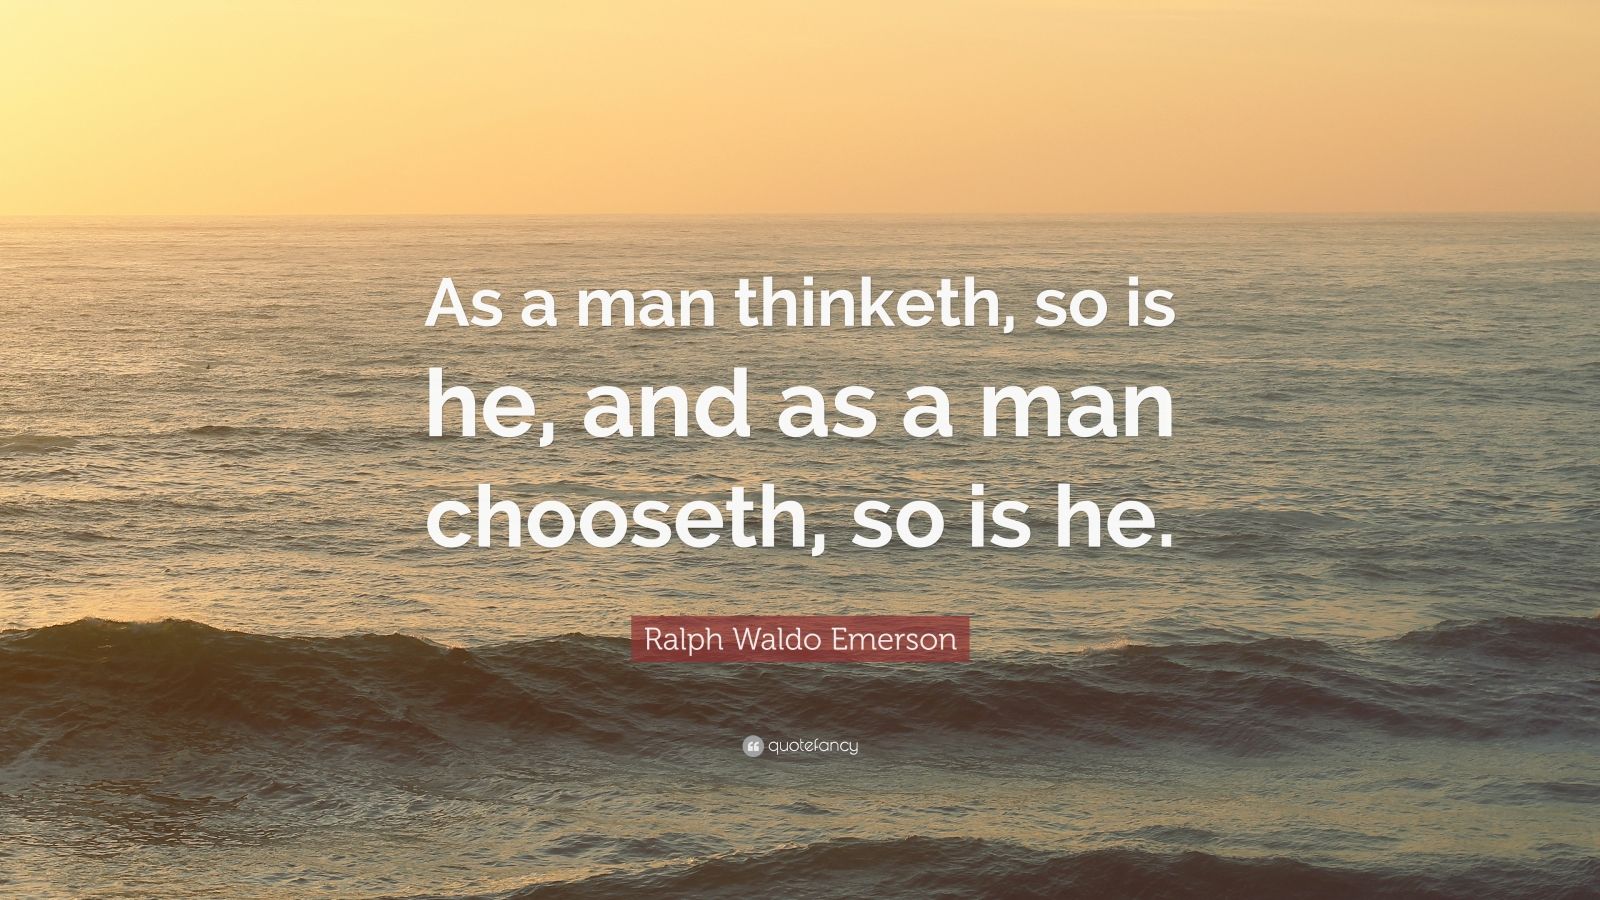 Ralph Waldo Emerson Quote: “As a man thinketh, so is he, and as a man